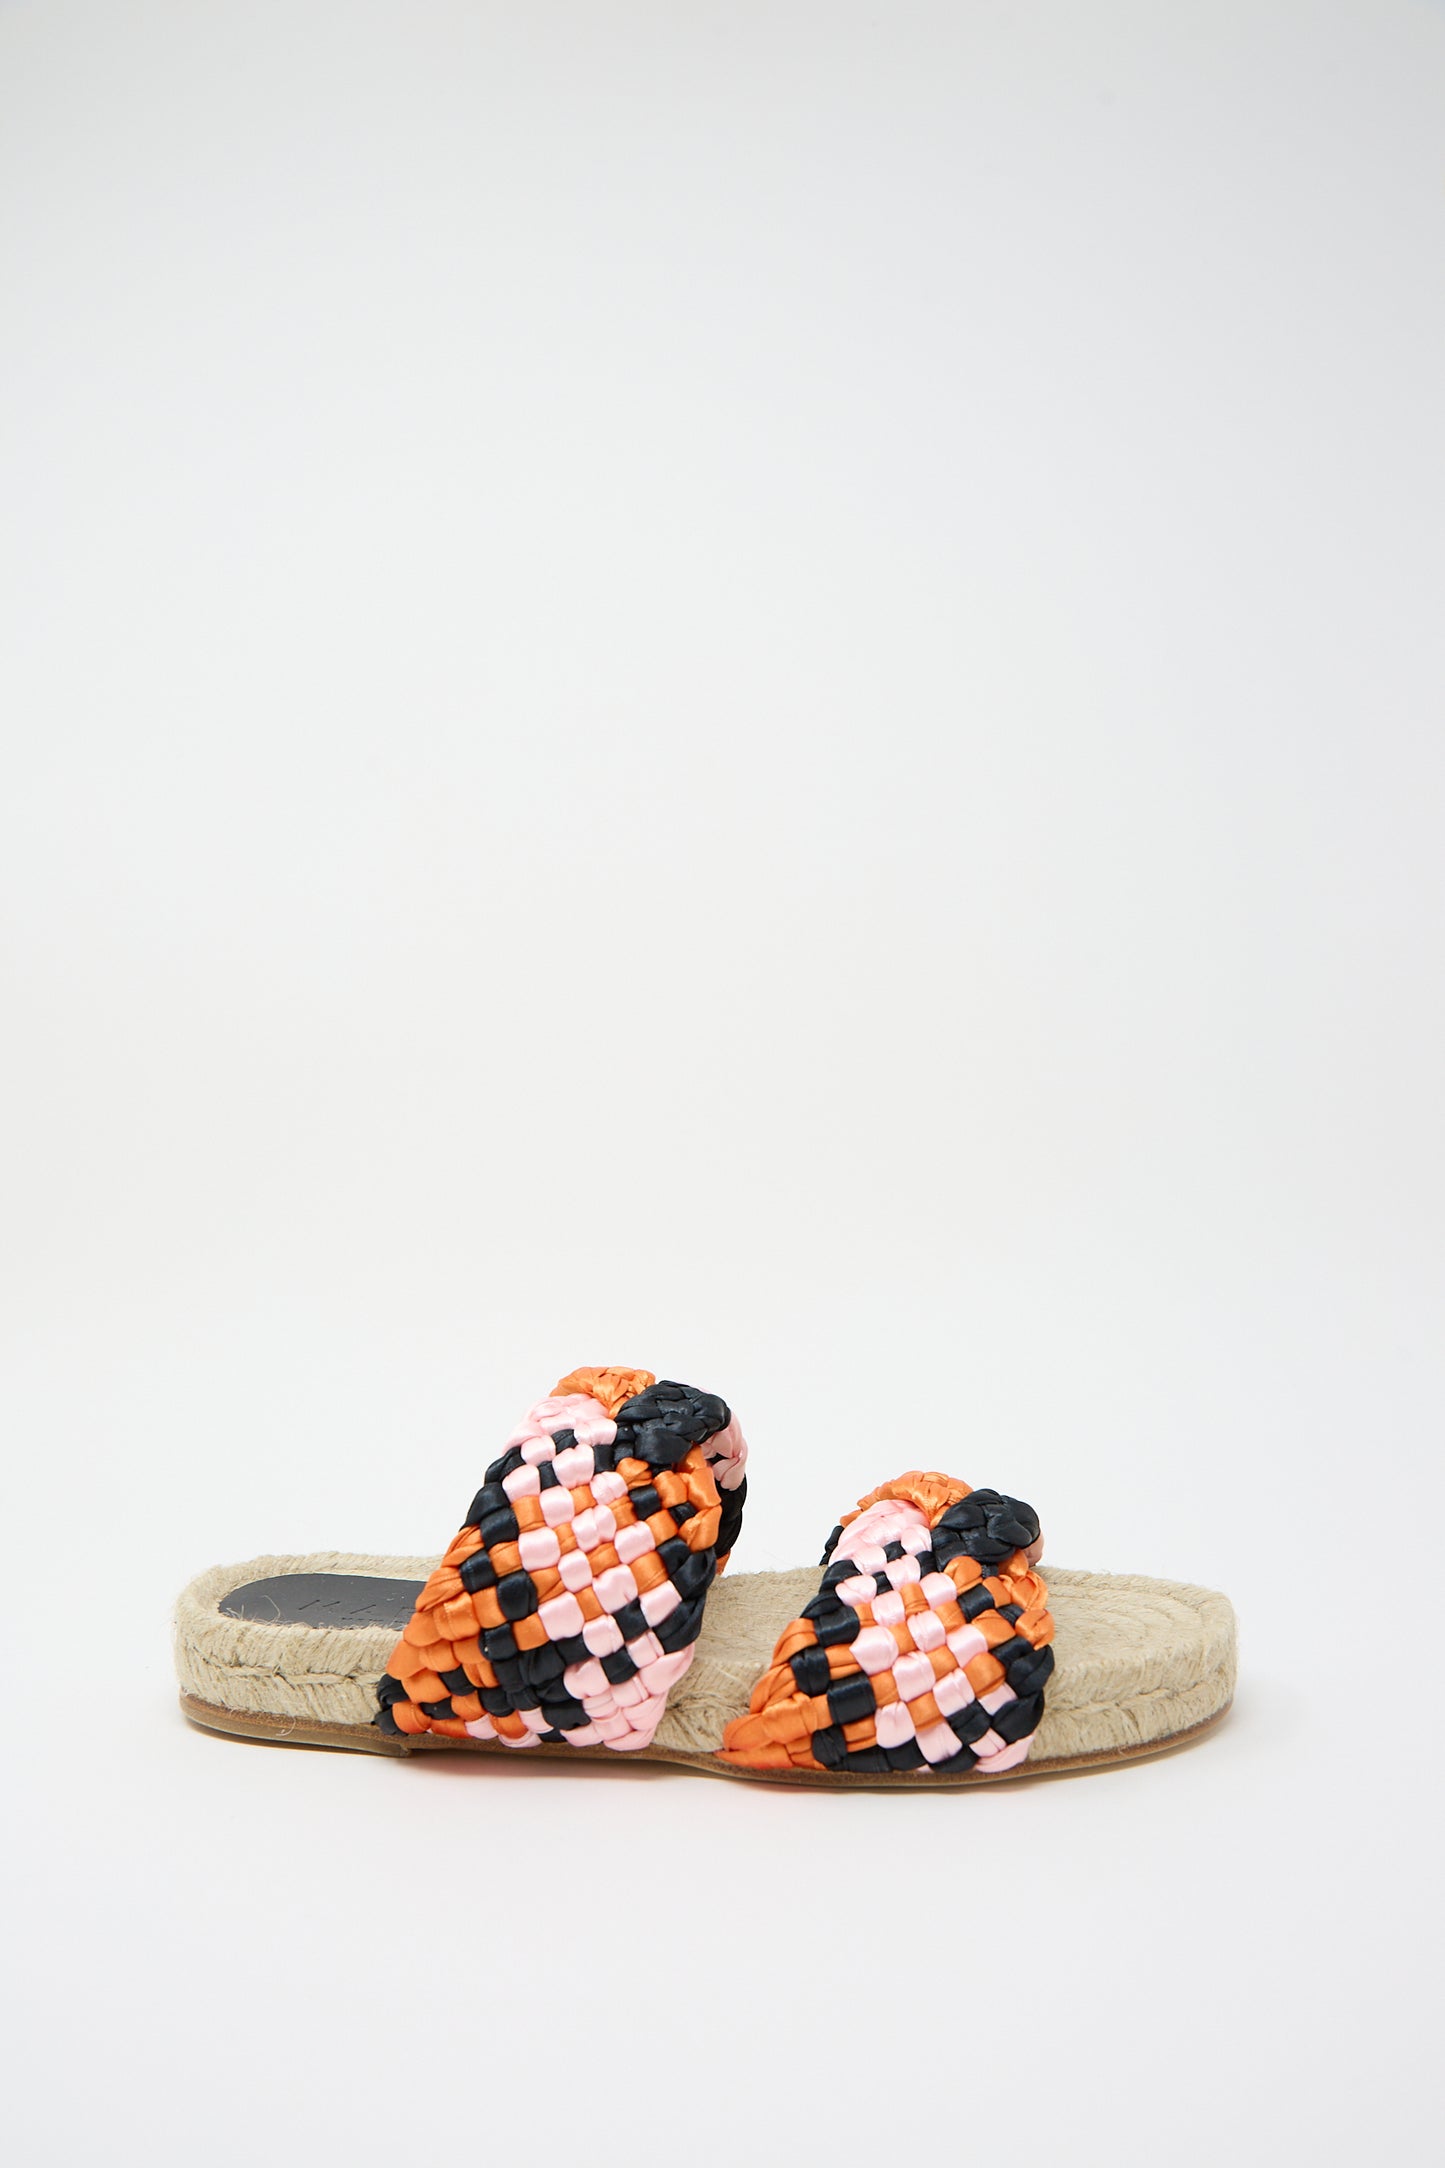 A pair of colorful Marea handmade Braided Satin Espadrille sandals on a white background.